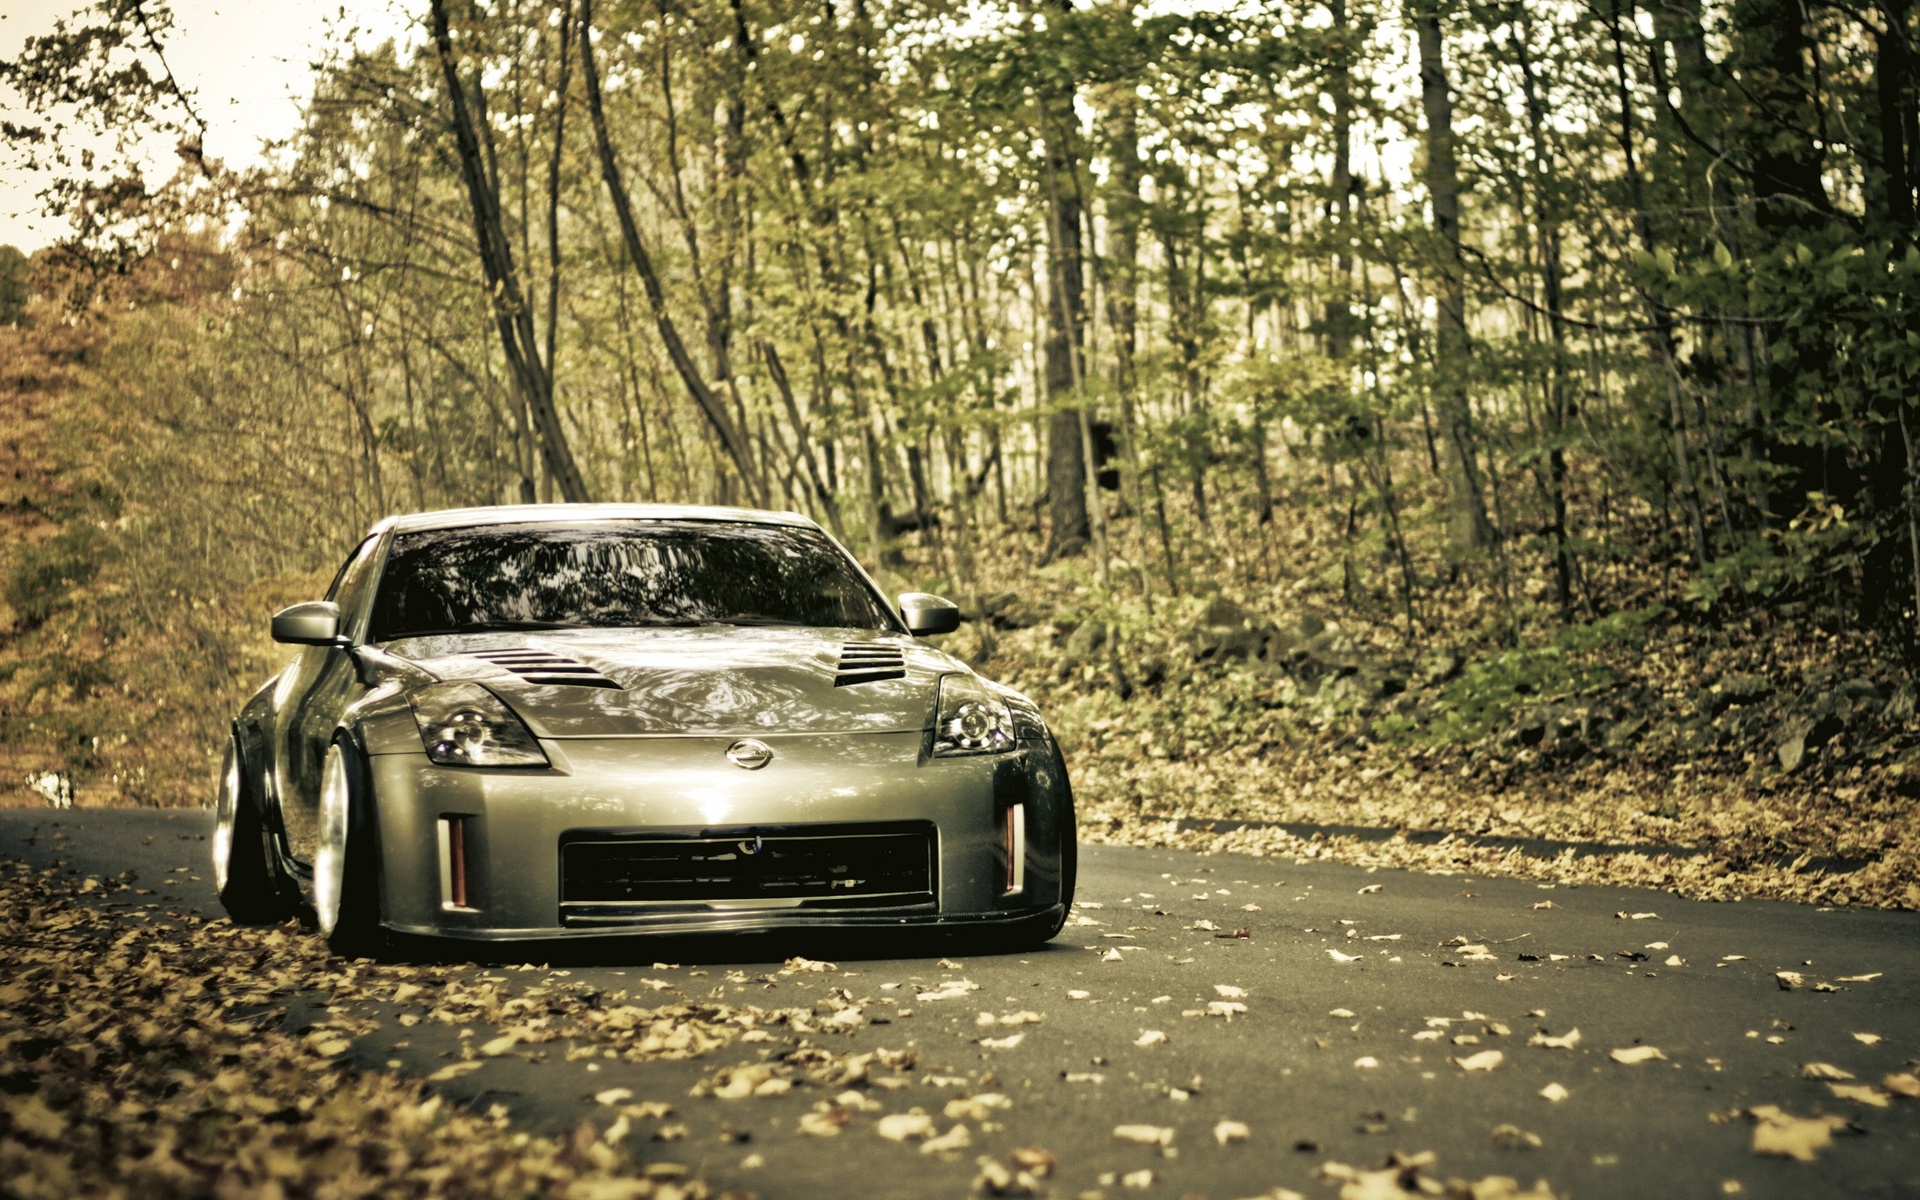 Top High Quality Nissan 350z Images   Nice Collection 1920x1200